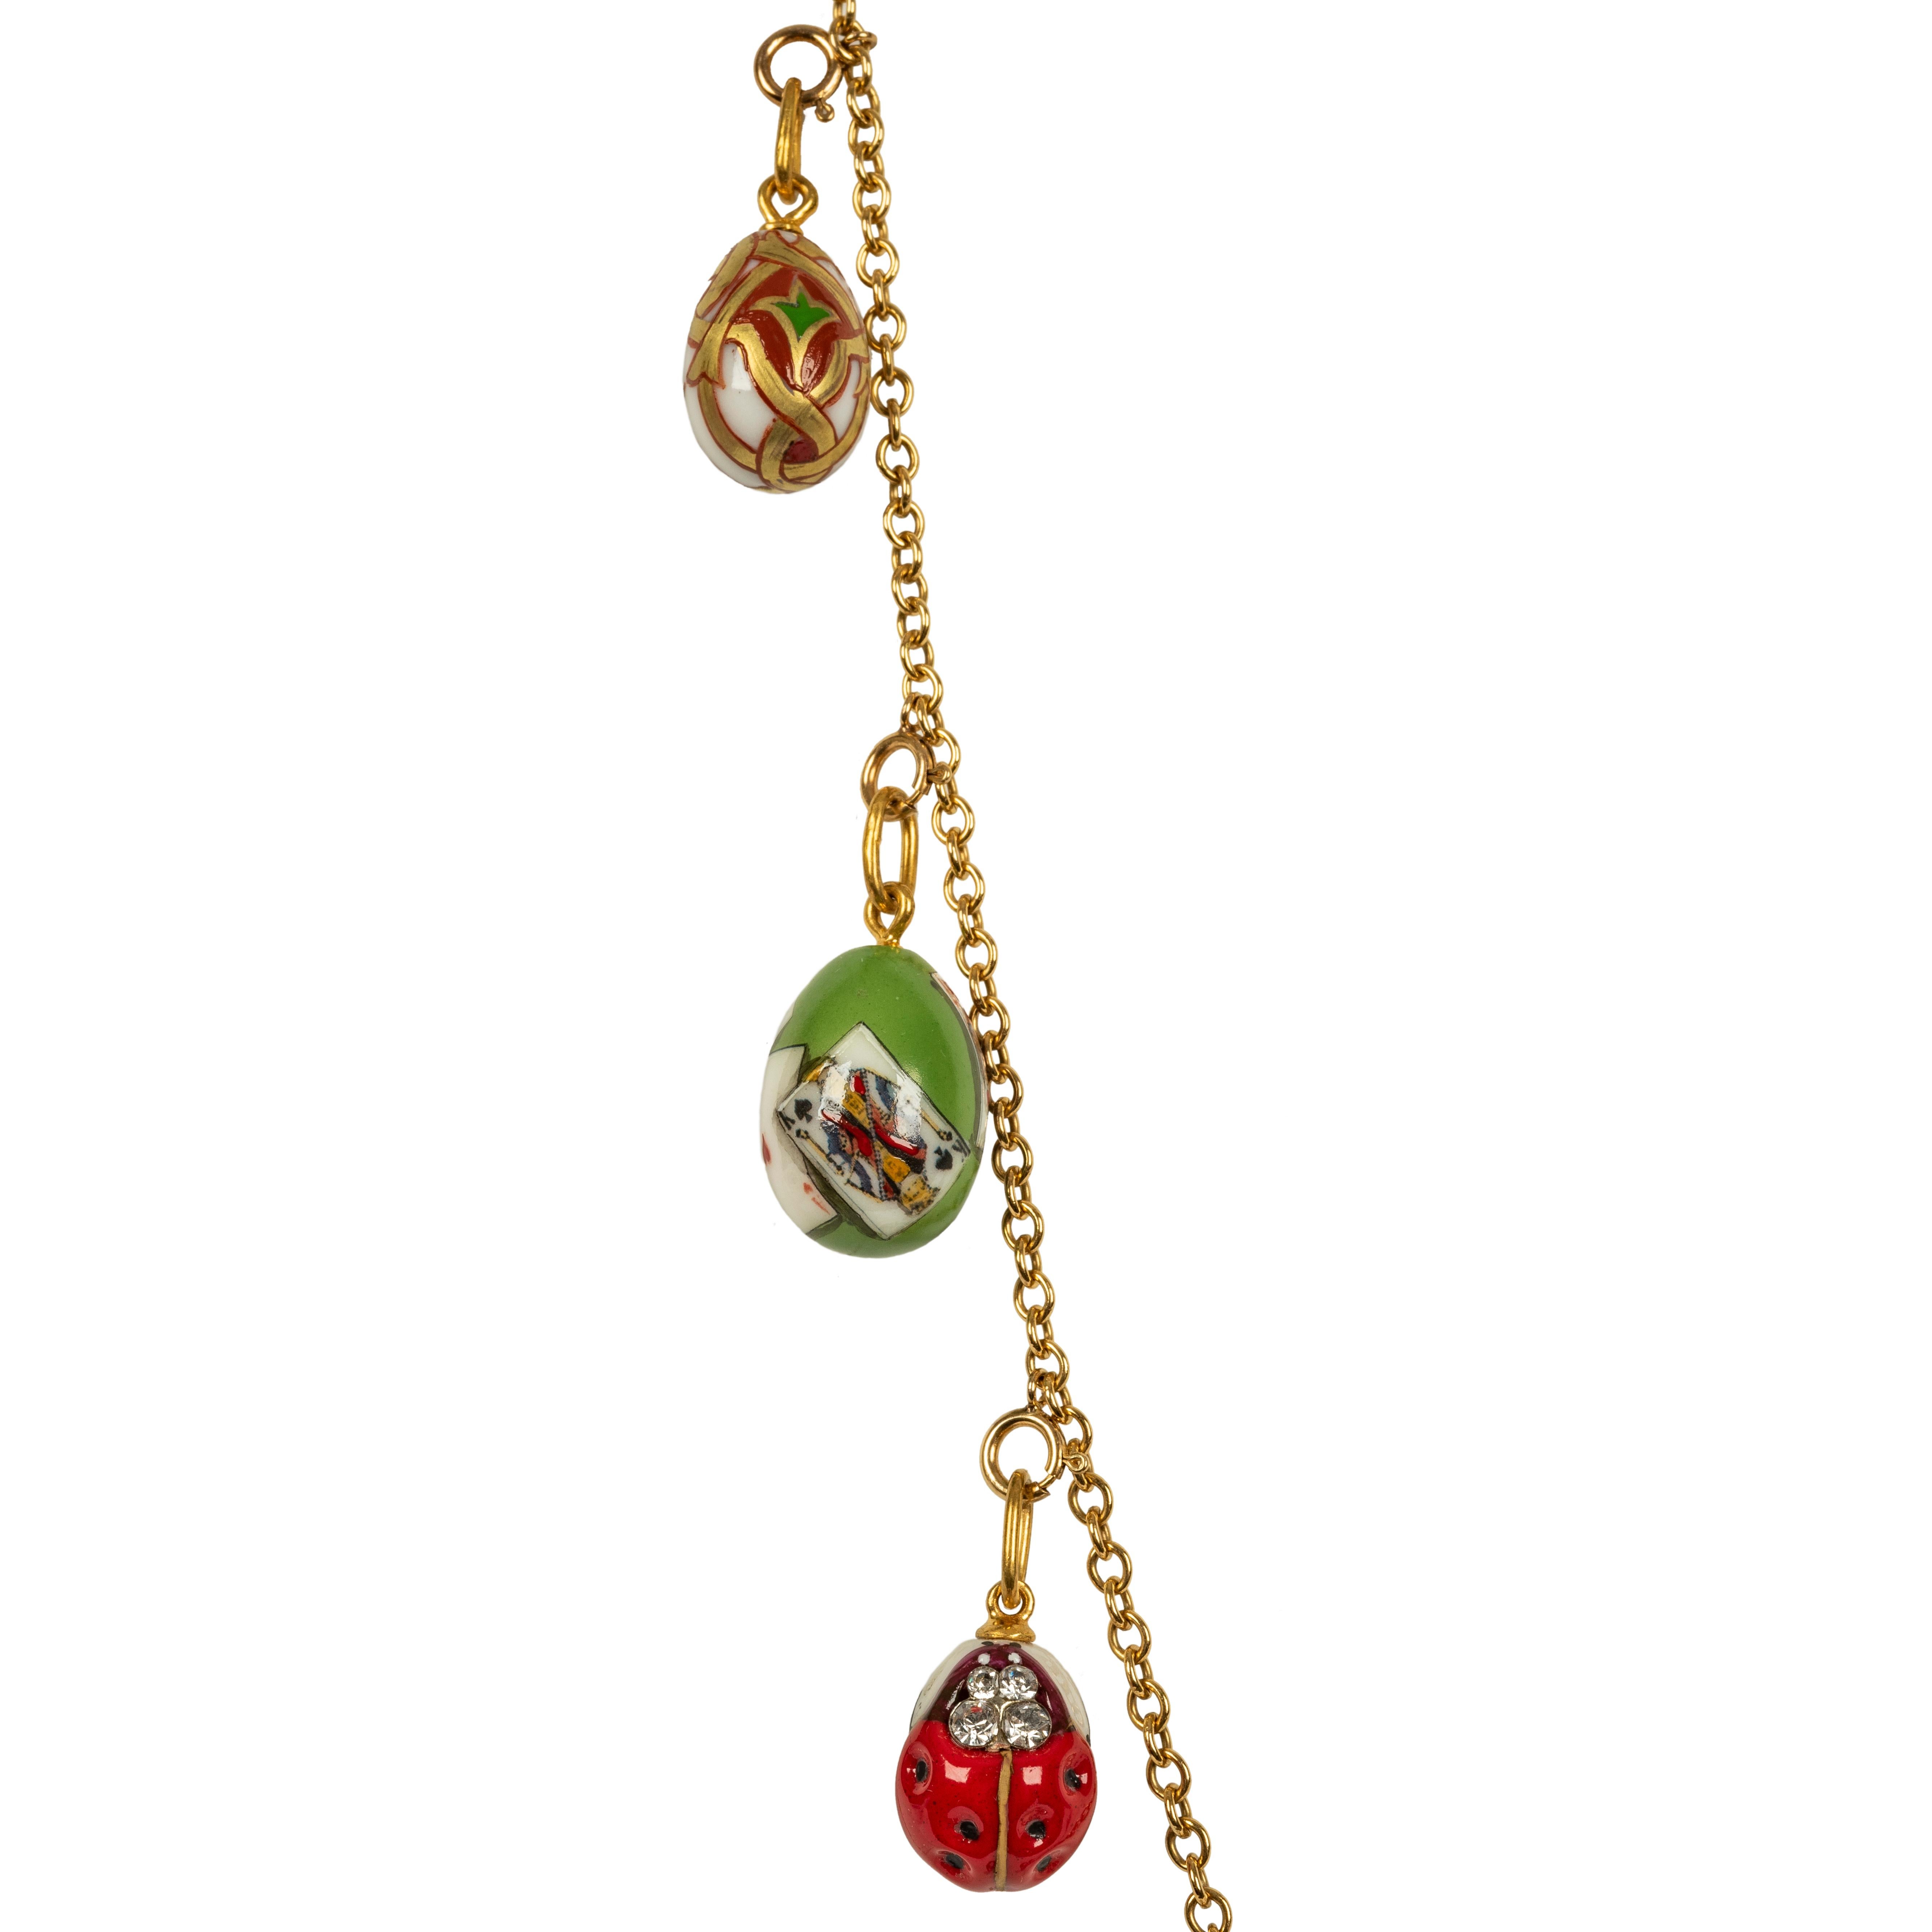 Russian Empire Dacha Easter Egg Necklace by Marie Betteley